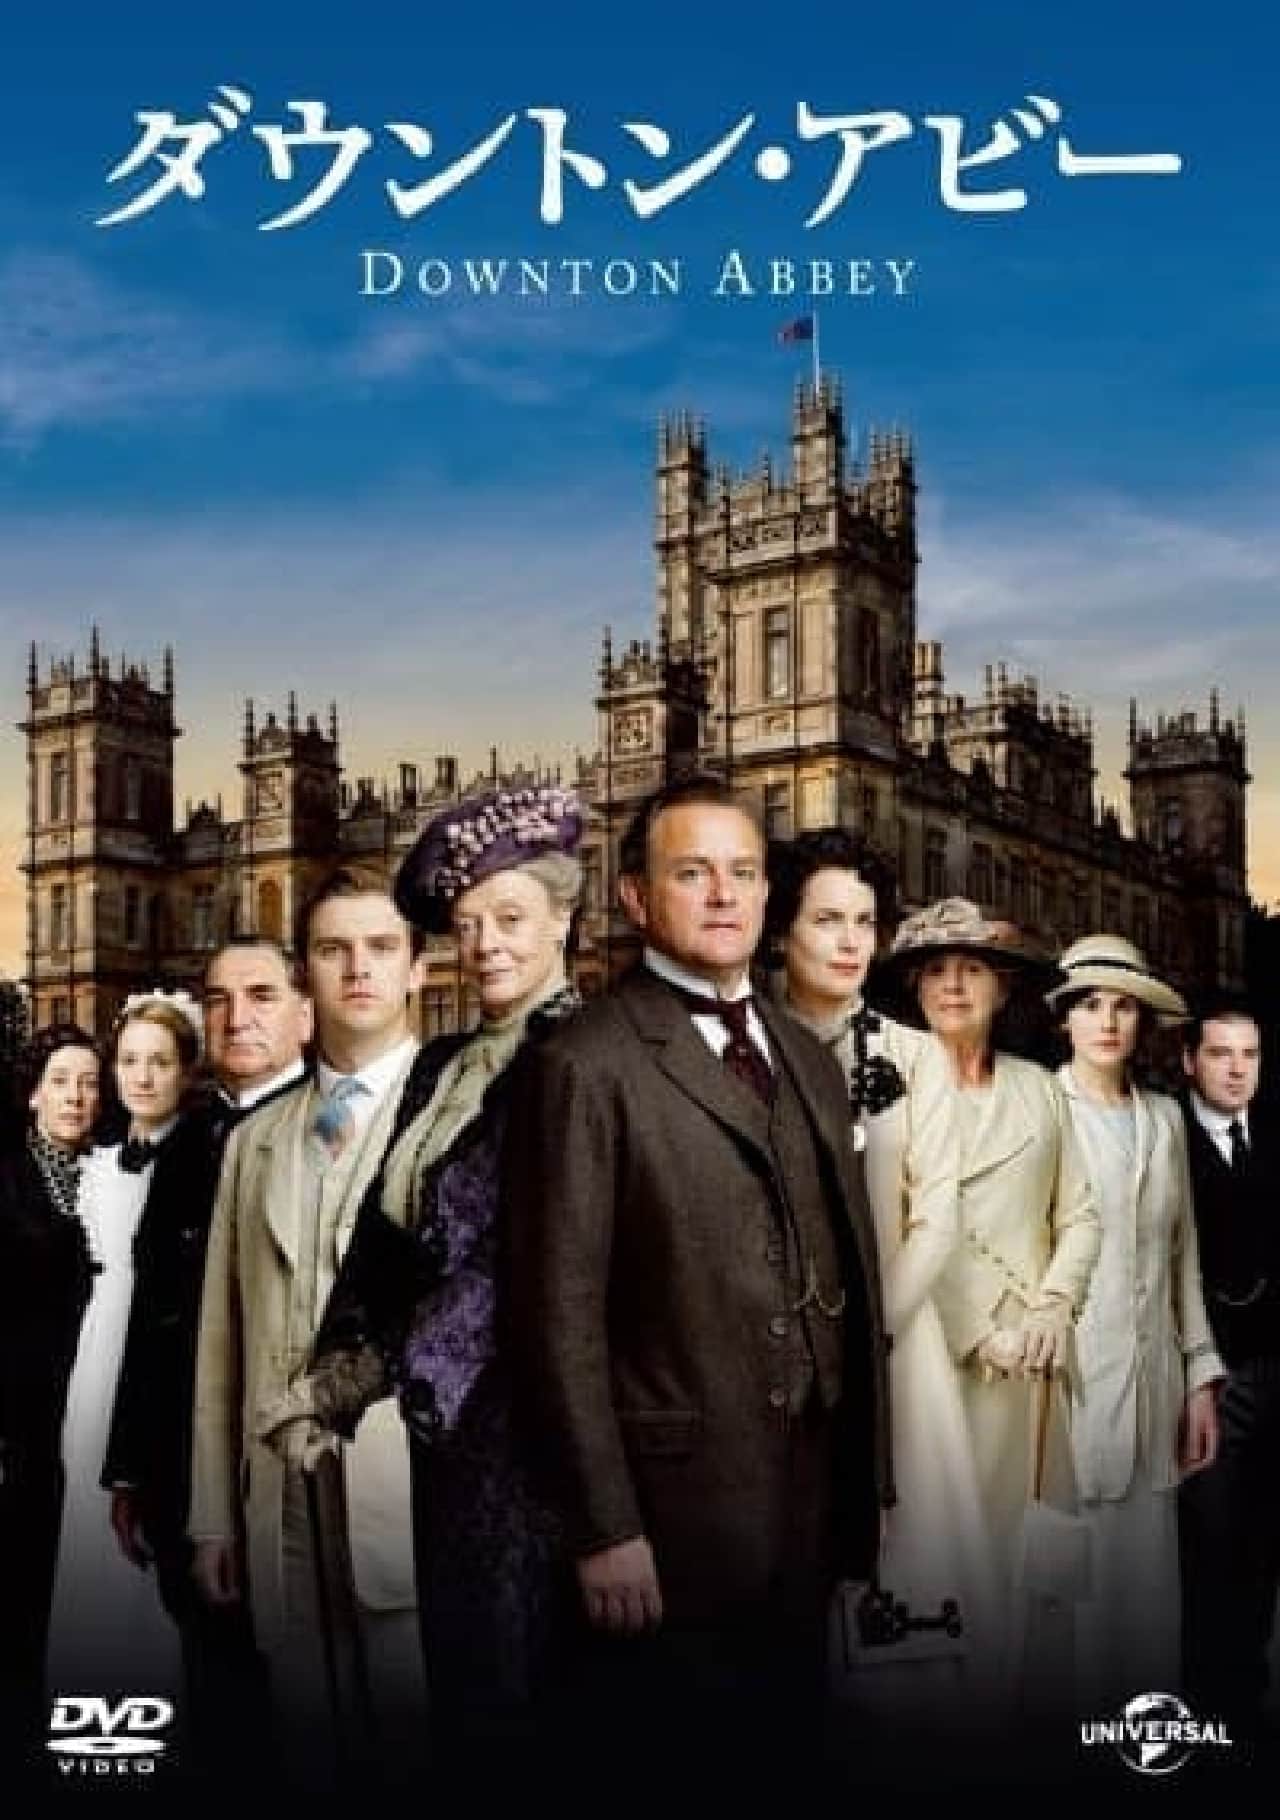 "Downton Abbey" is on sale on Blu-ray & DVD-BOX. DVD rental is also available!